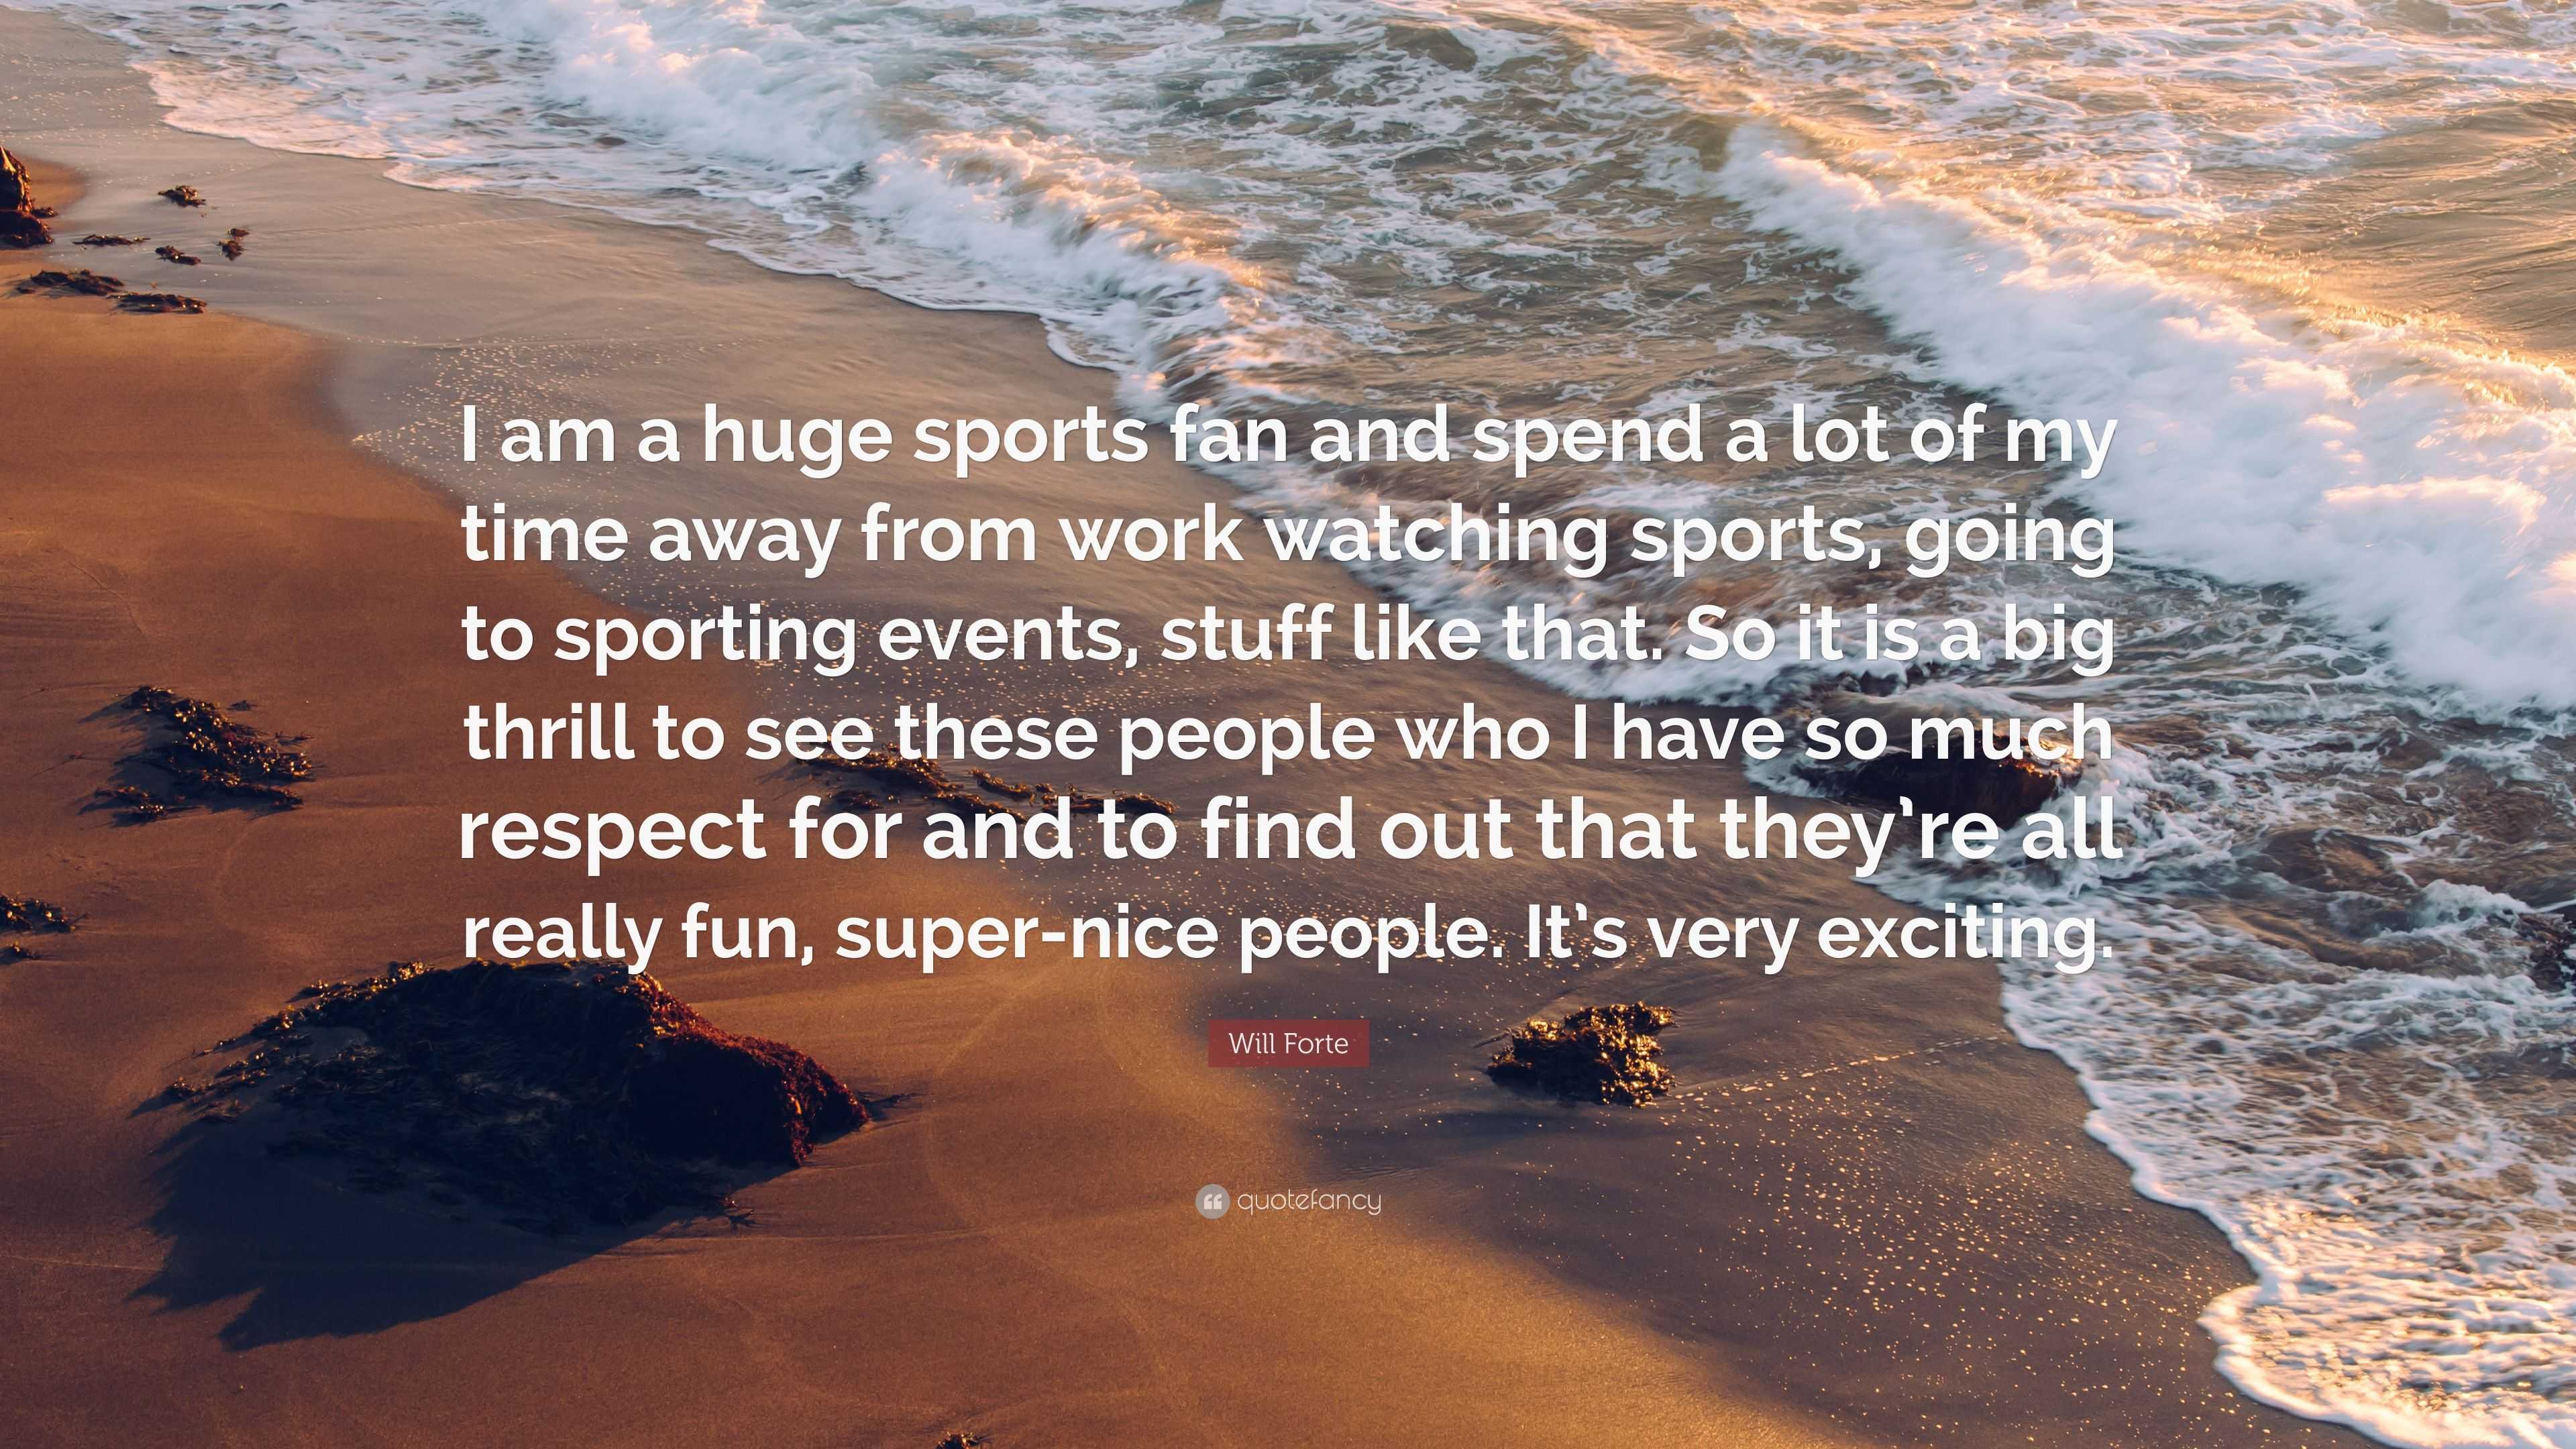 kasseapparat indad Urter Will Forte Quote: “I am a huge sports fan and spend a lot of my time away  from work watching sports, going to sporting events, stuff like t...”